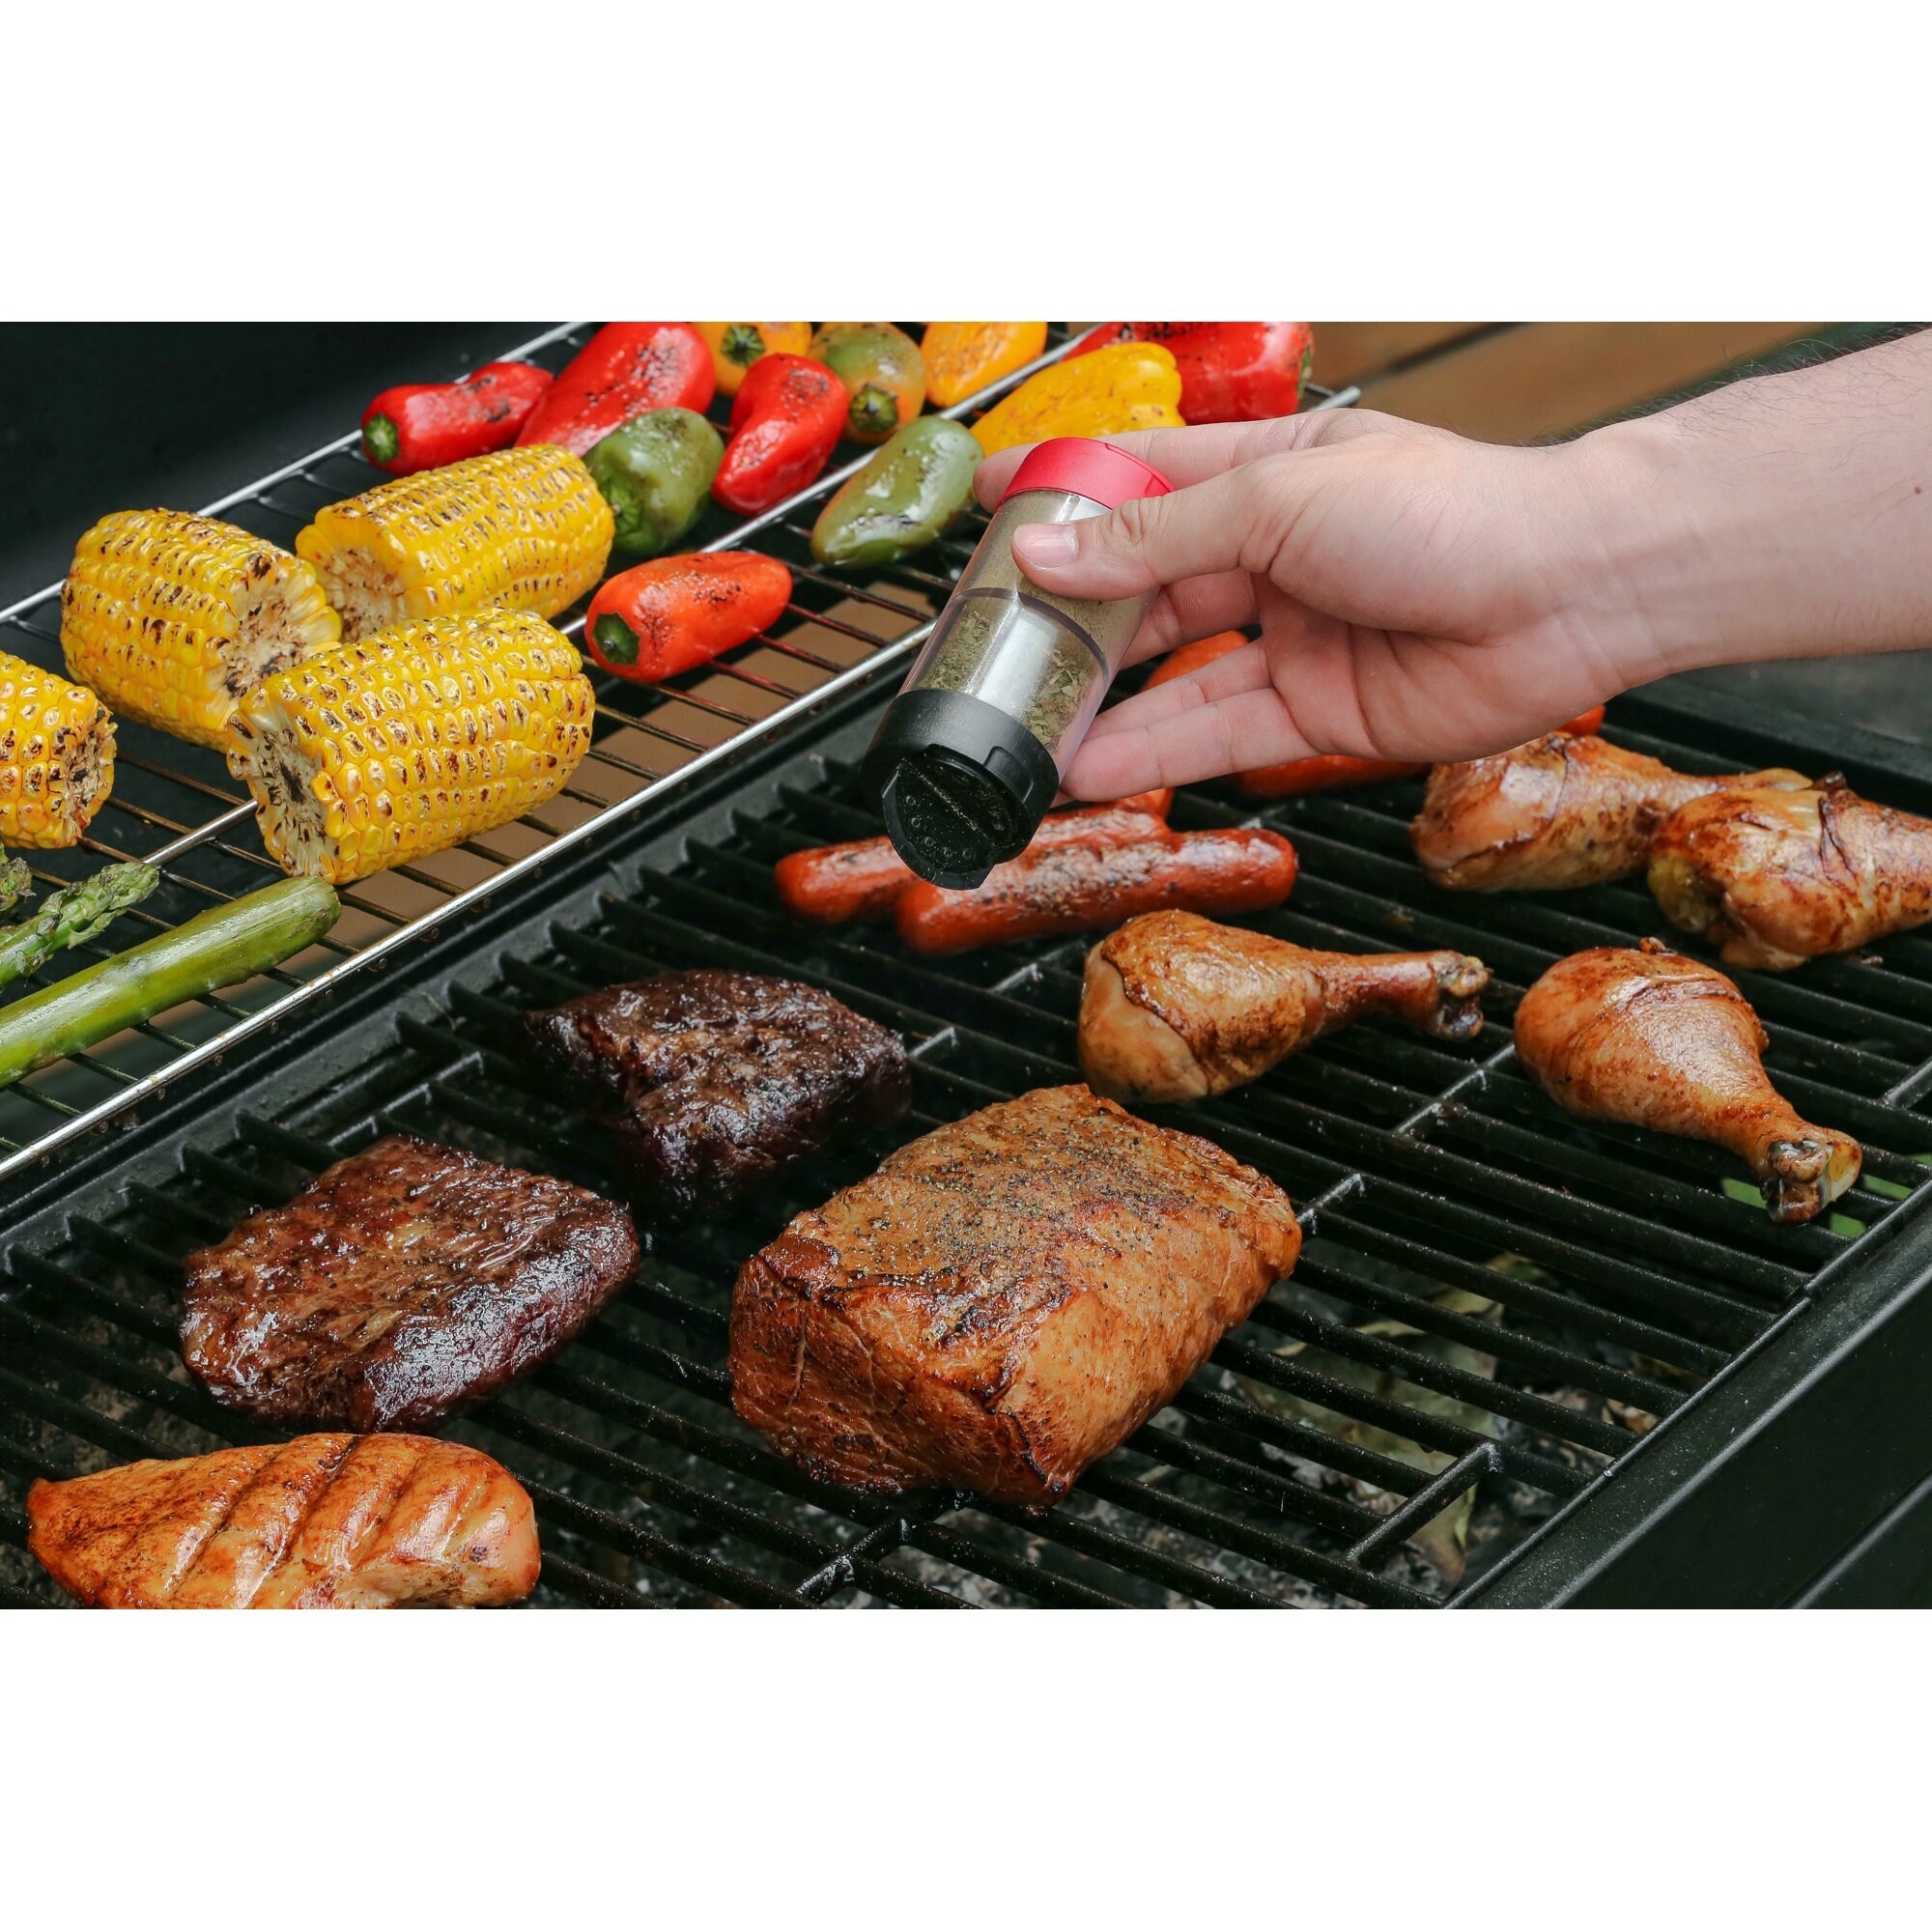 https://ak1.ostkcdn.com/images/products/is/images/direct/1a6dac9ec6fb5046a83a95653abb9eb624aef94d/Essential-BBQ-Tool-Set-for-Easy-cooking%2C-12-Piece.jpg